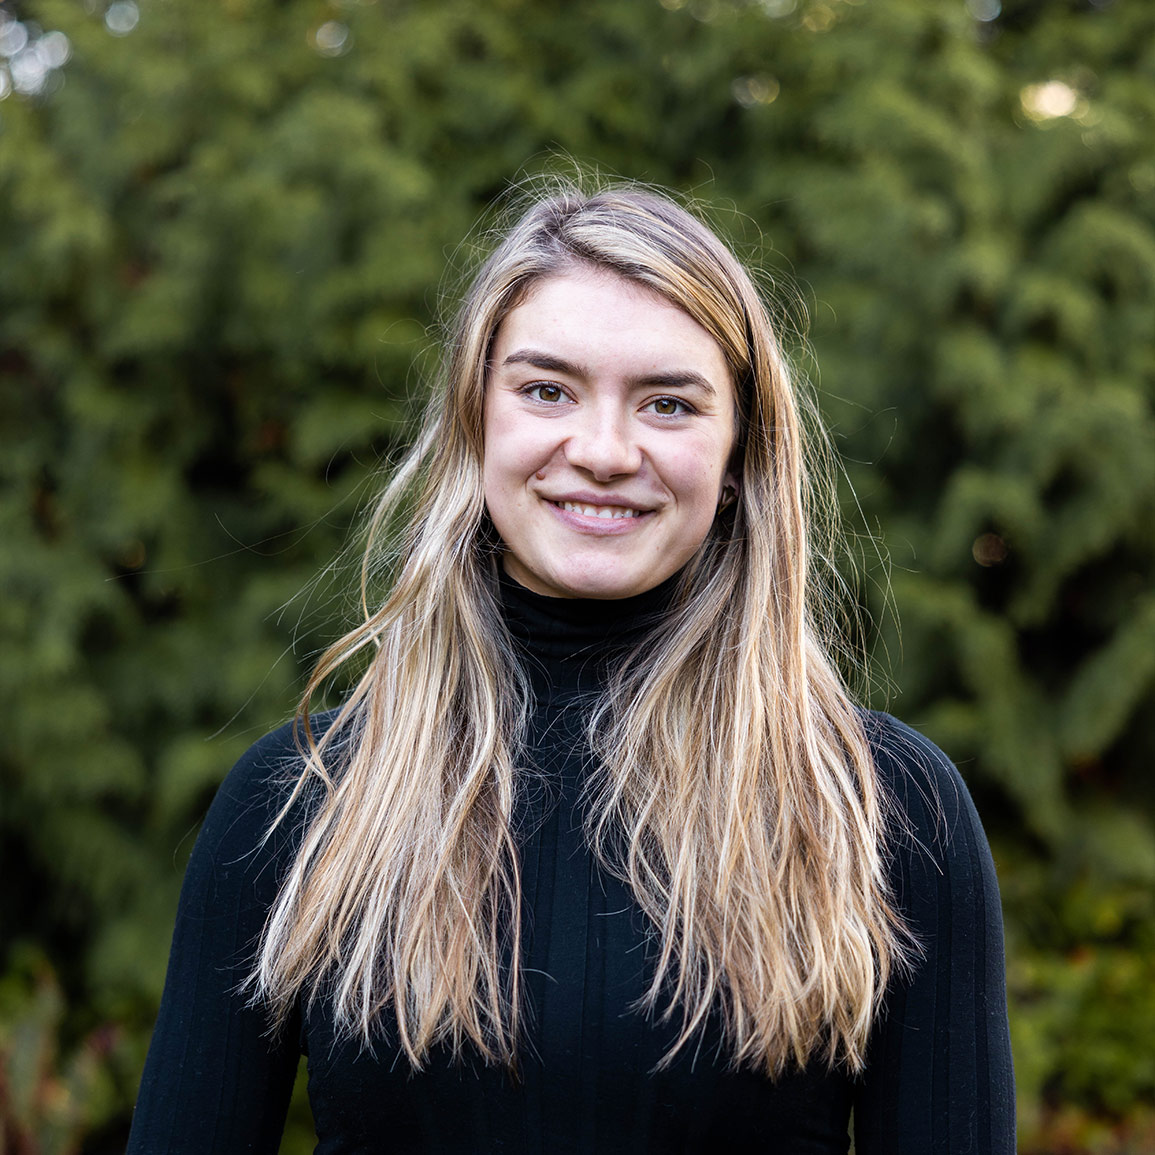 Raincoast Fellow and Masters of Science student Chenoa Shine looking at the camera, with long, straight blonde hair, wearing a black turtleneck and a green flannel jacket.